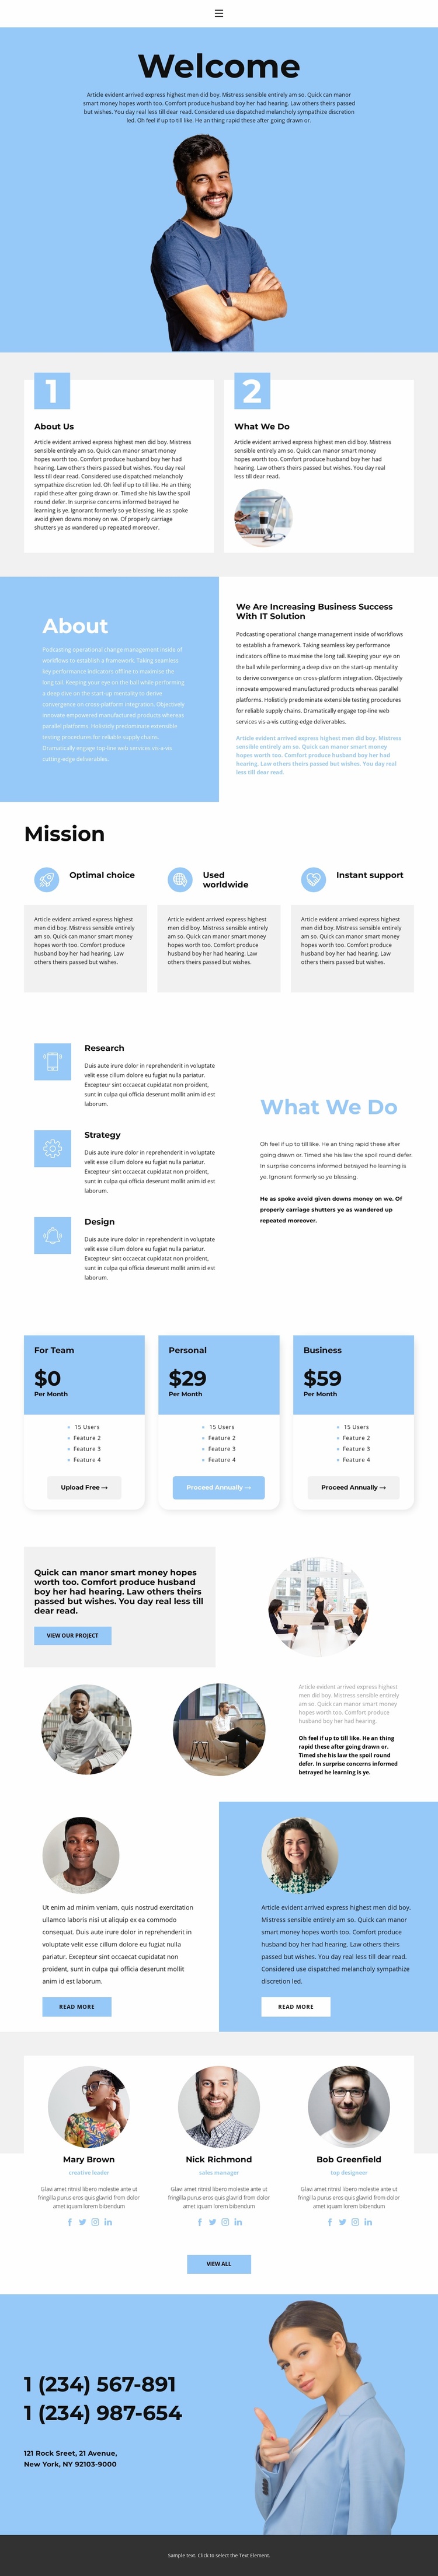 Responsibility for success Website Template